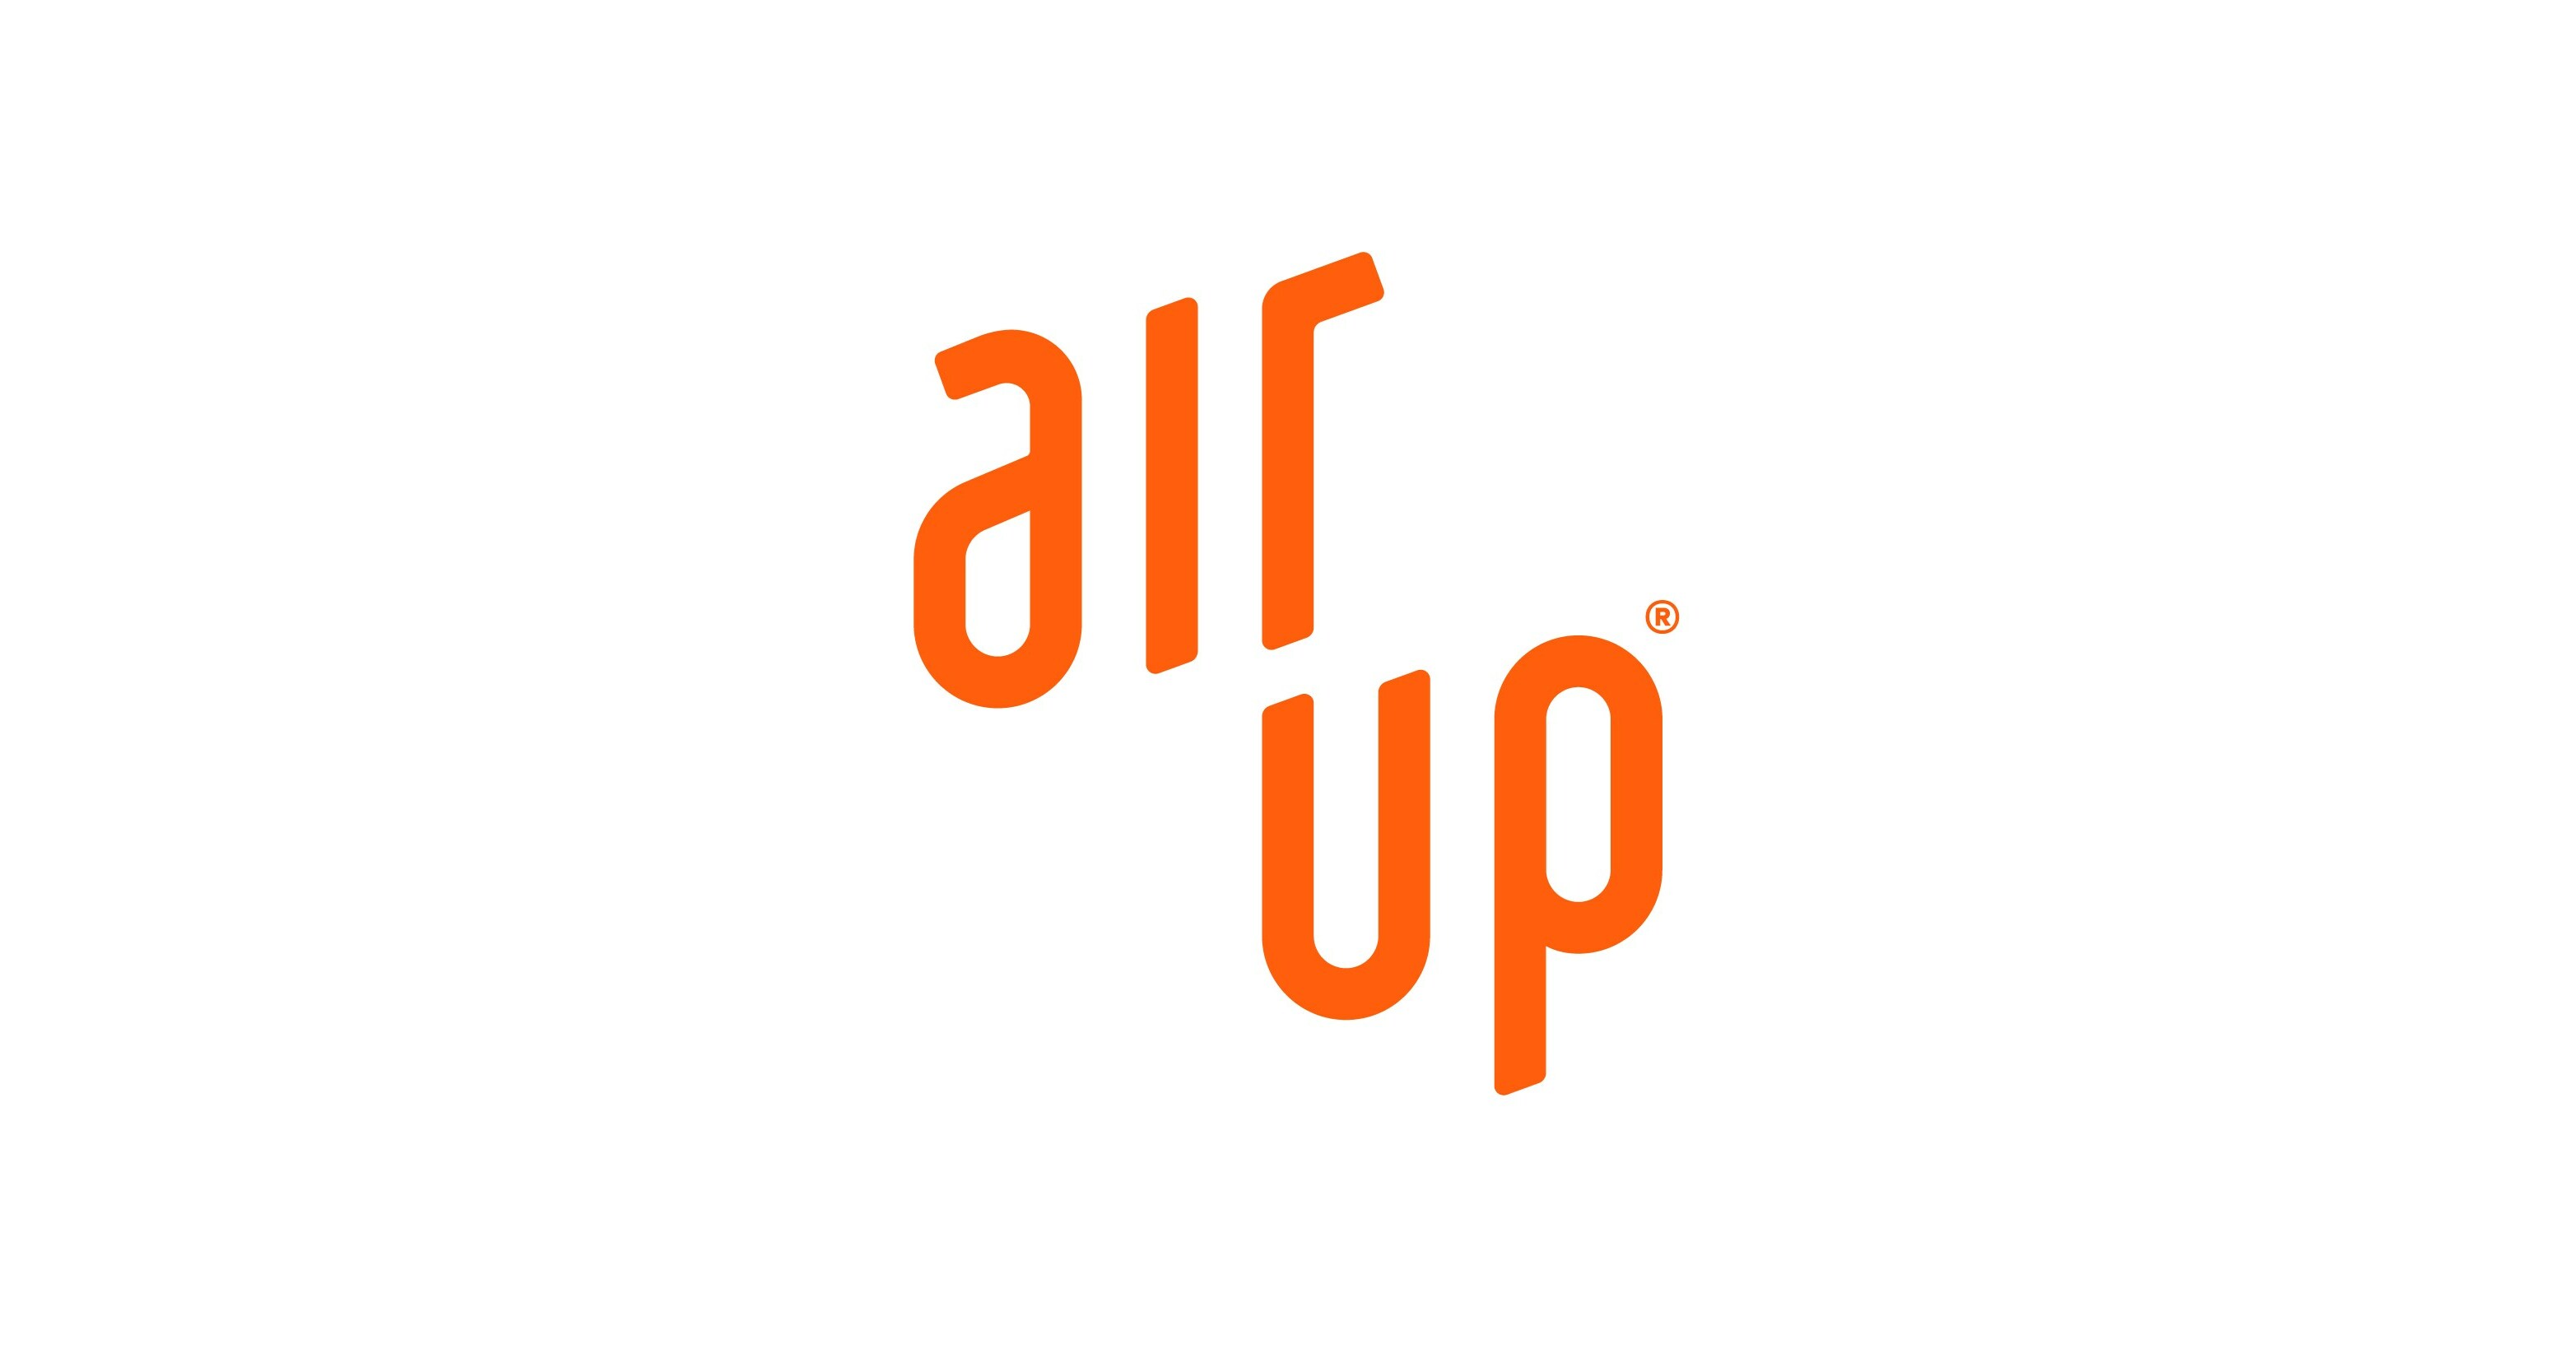 Scent-flavored hydration leader air up® launches new Generation 2